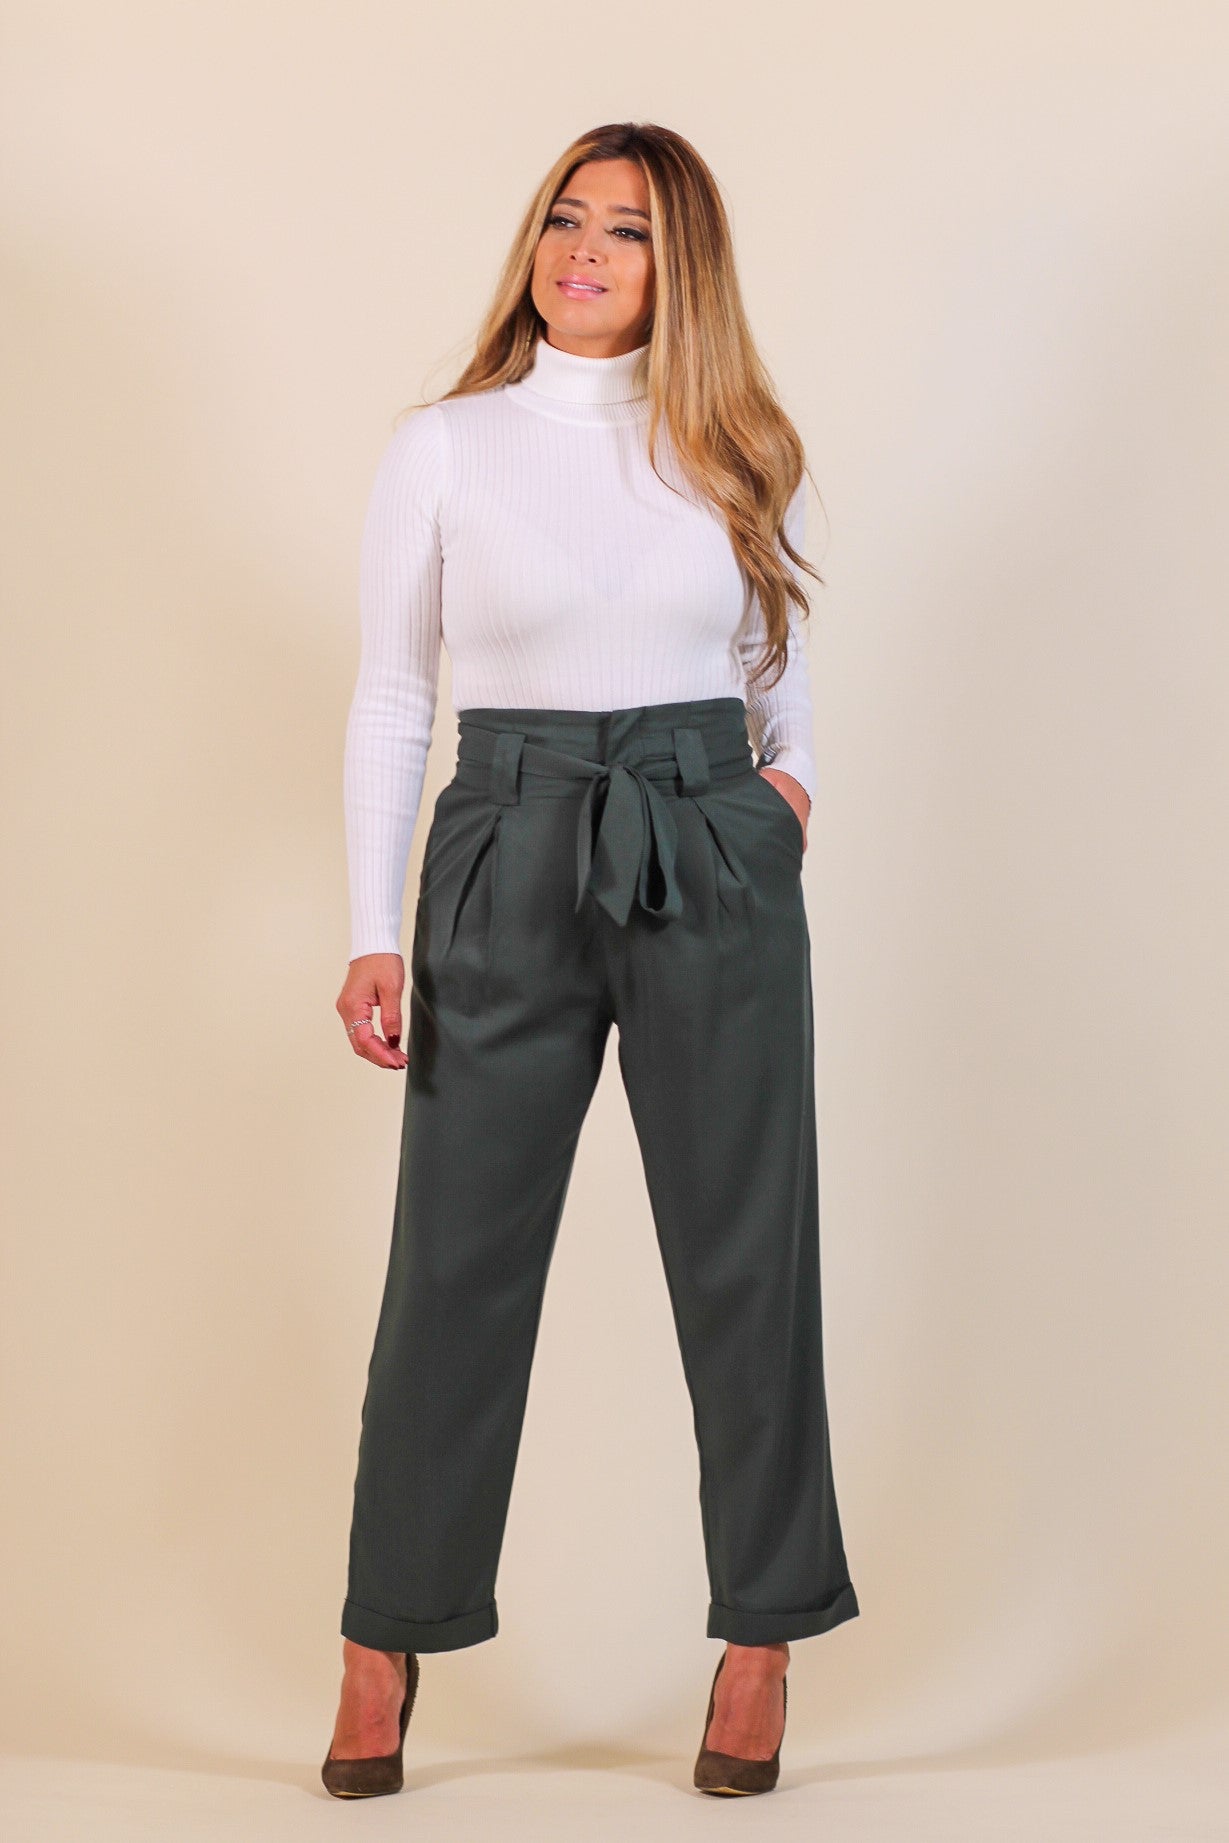 Girls anthracite grey flowing paperbag trousers